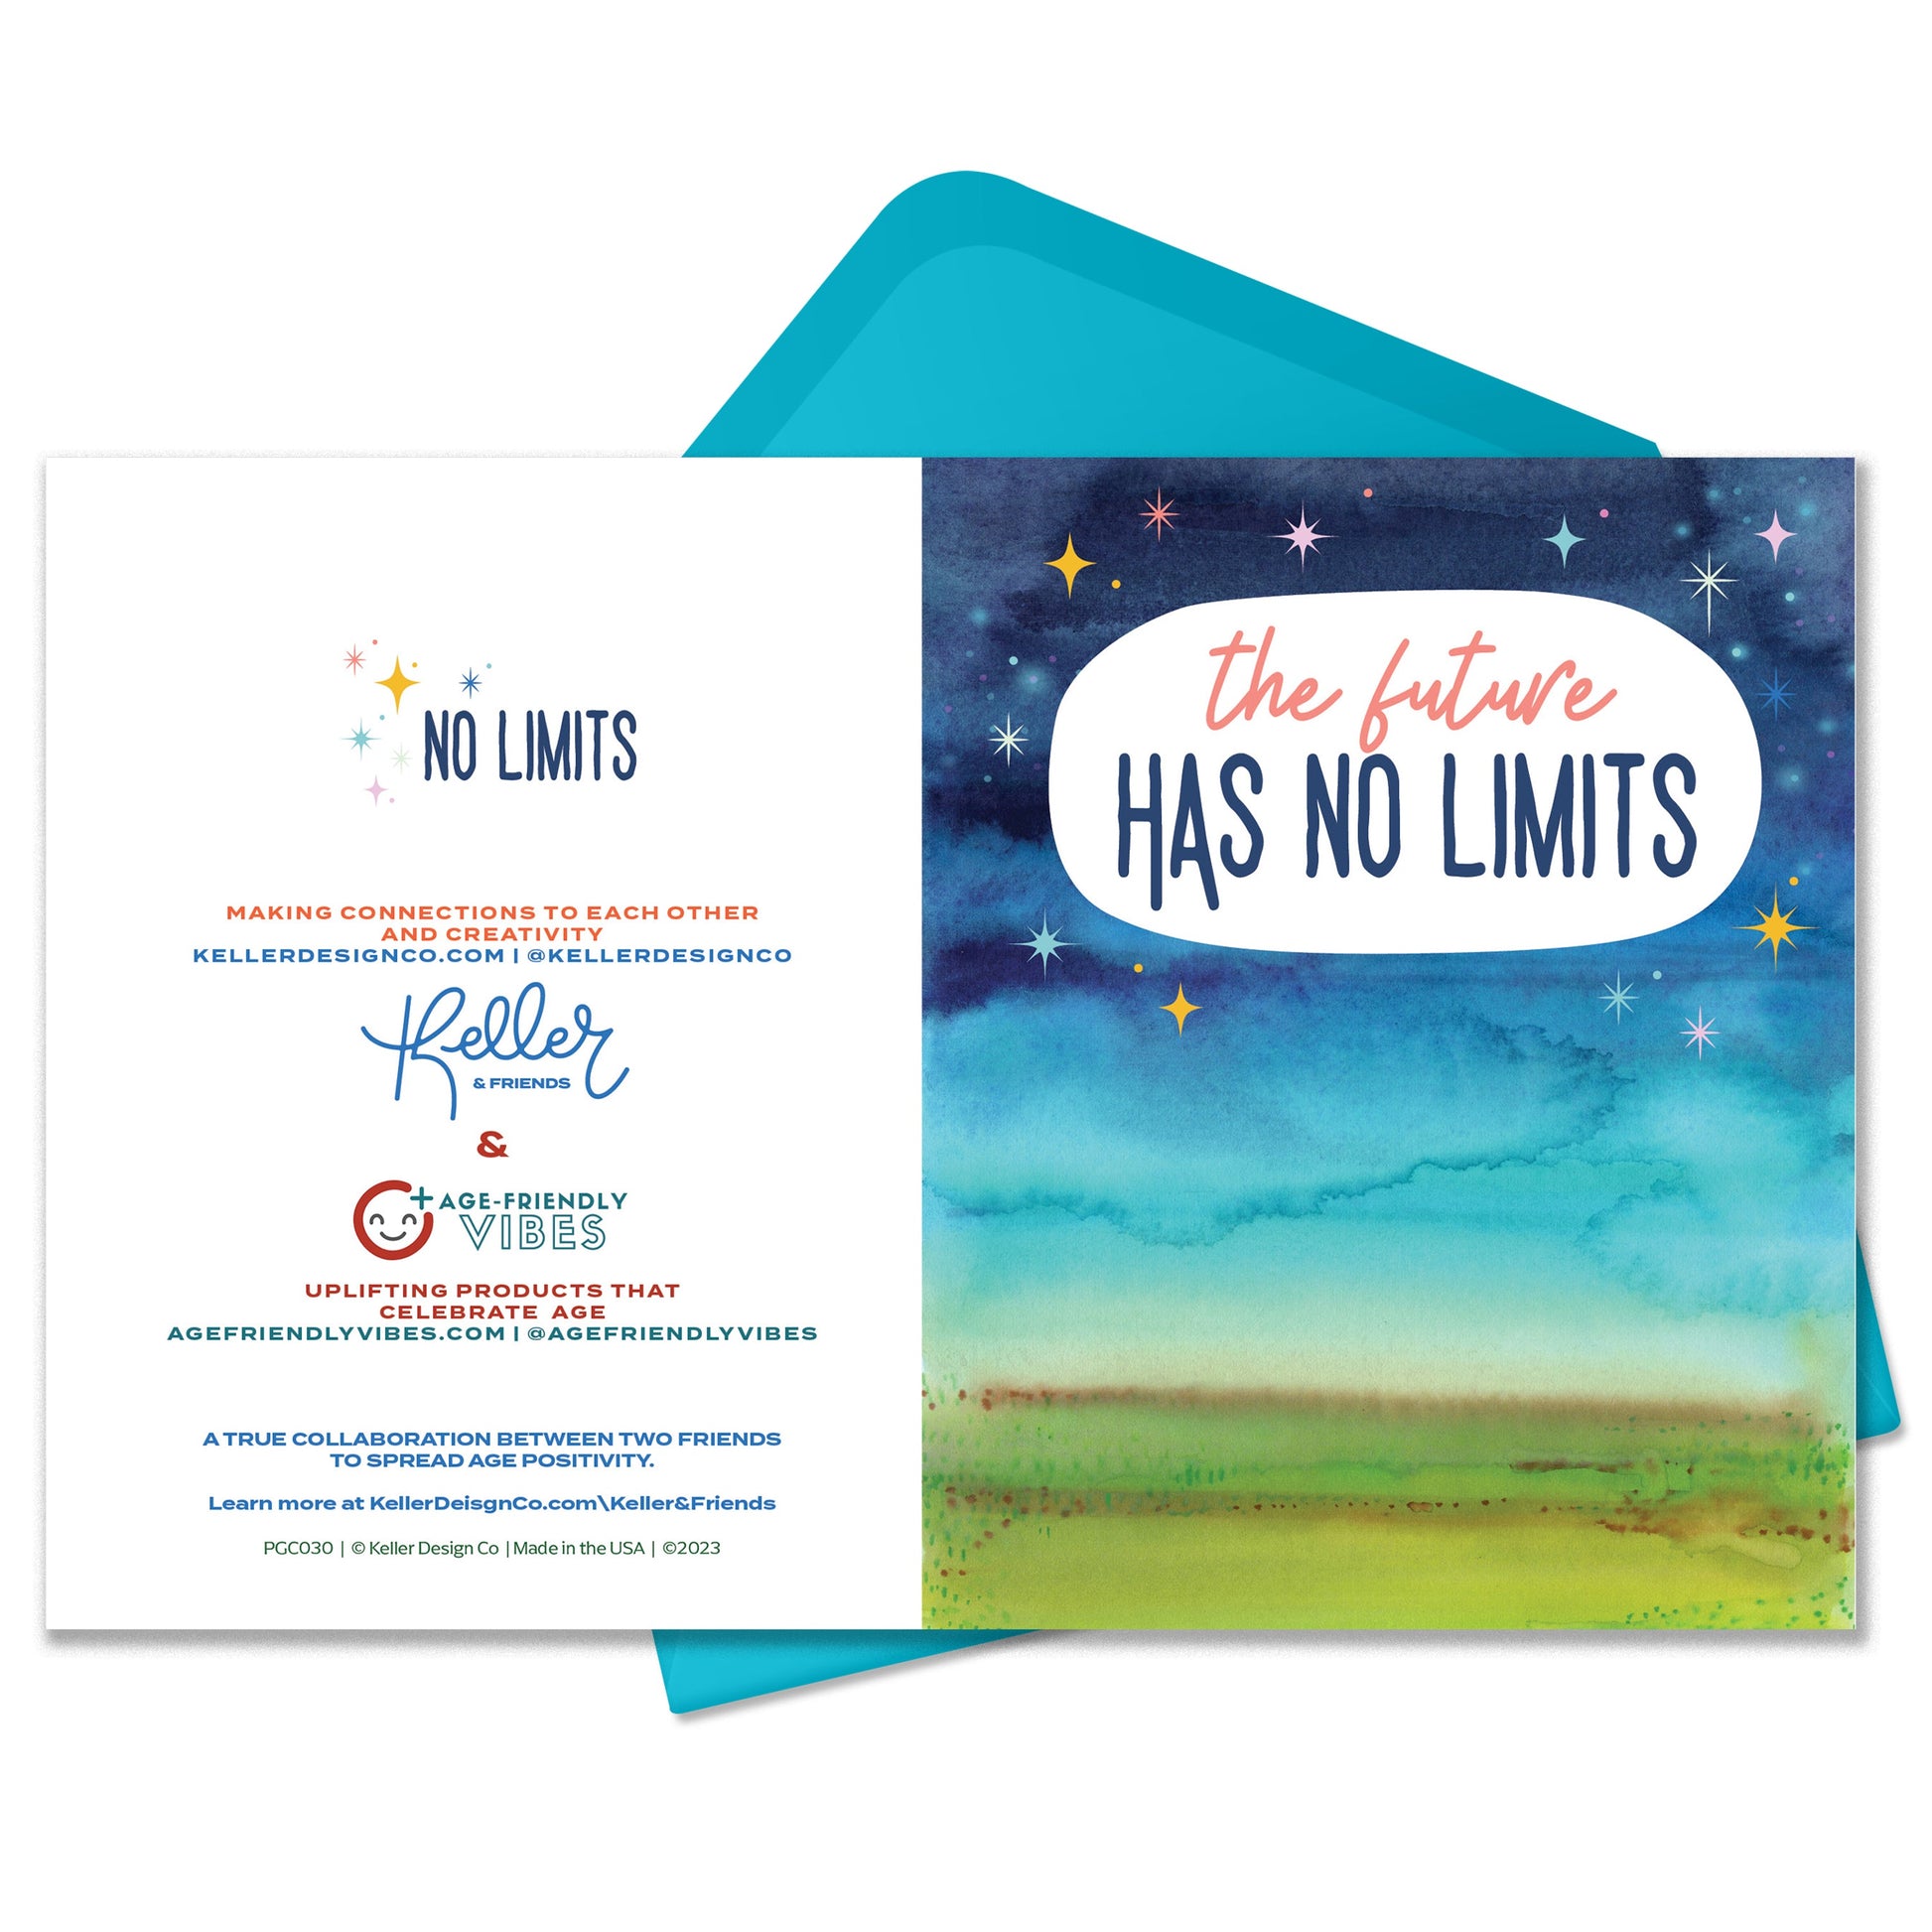 The Future Has No Limits Greeting cards. WAtercolor landscape with sparkly stars. There is a turquoise blue envelope and it sits on a white background.  The back of the card says No Limits and has the Keller DEsign Co Logo